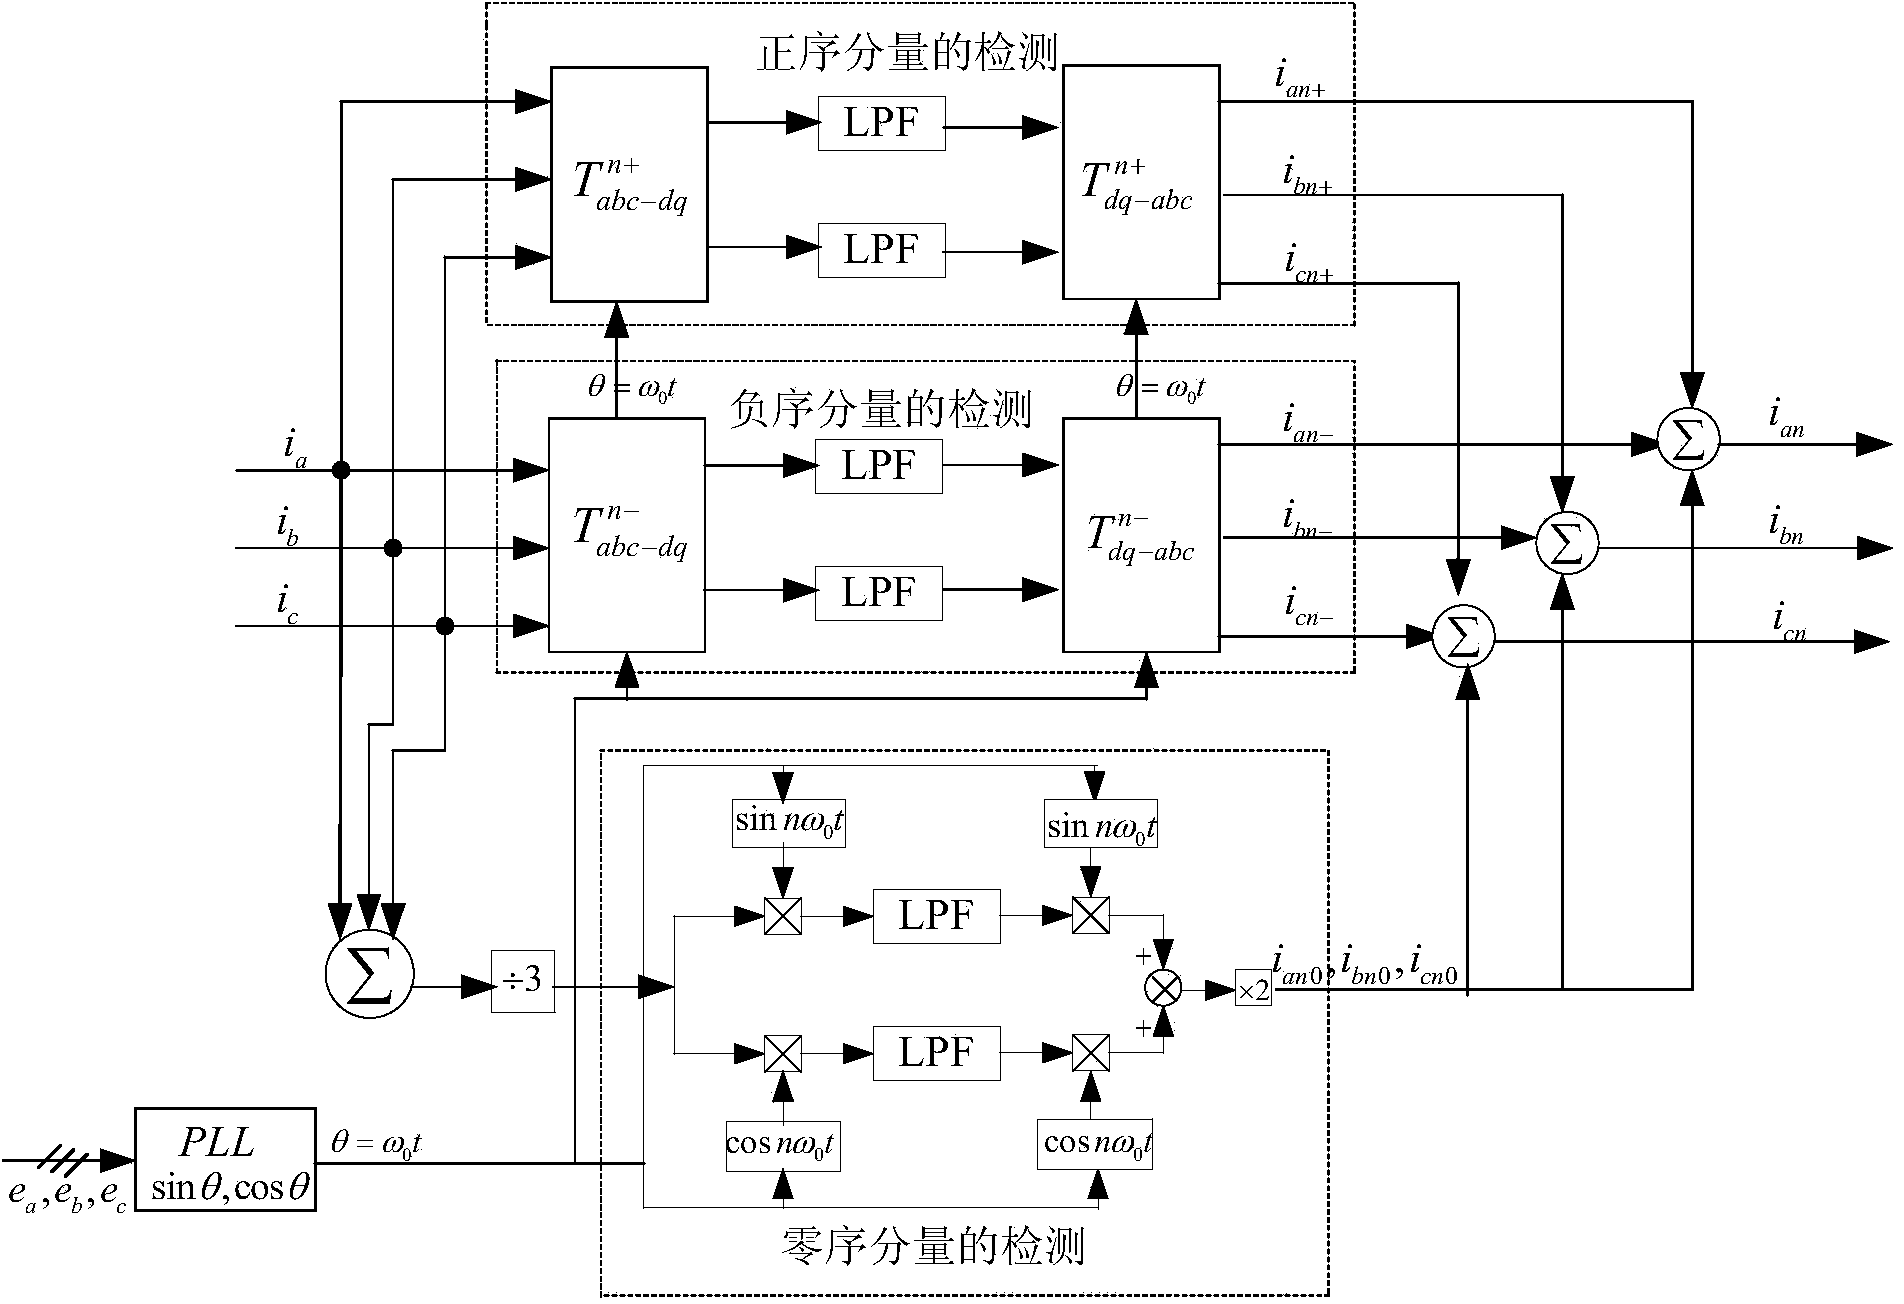 Method for detecting any-th harmonic component and reactive current of three-phase four-wire system